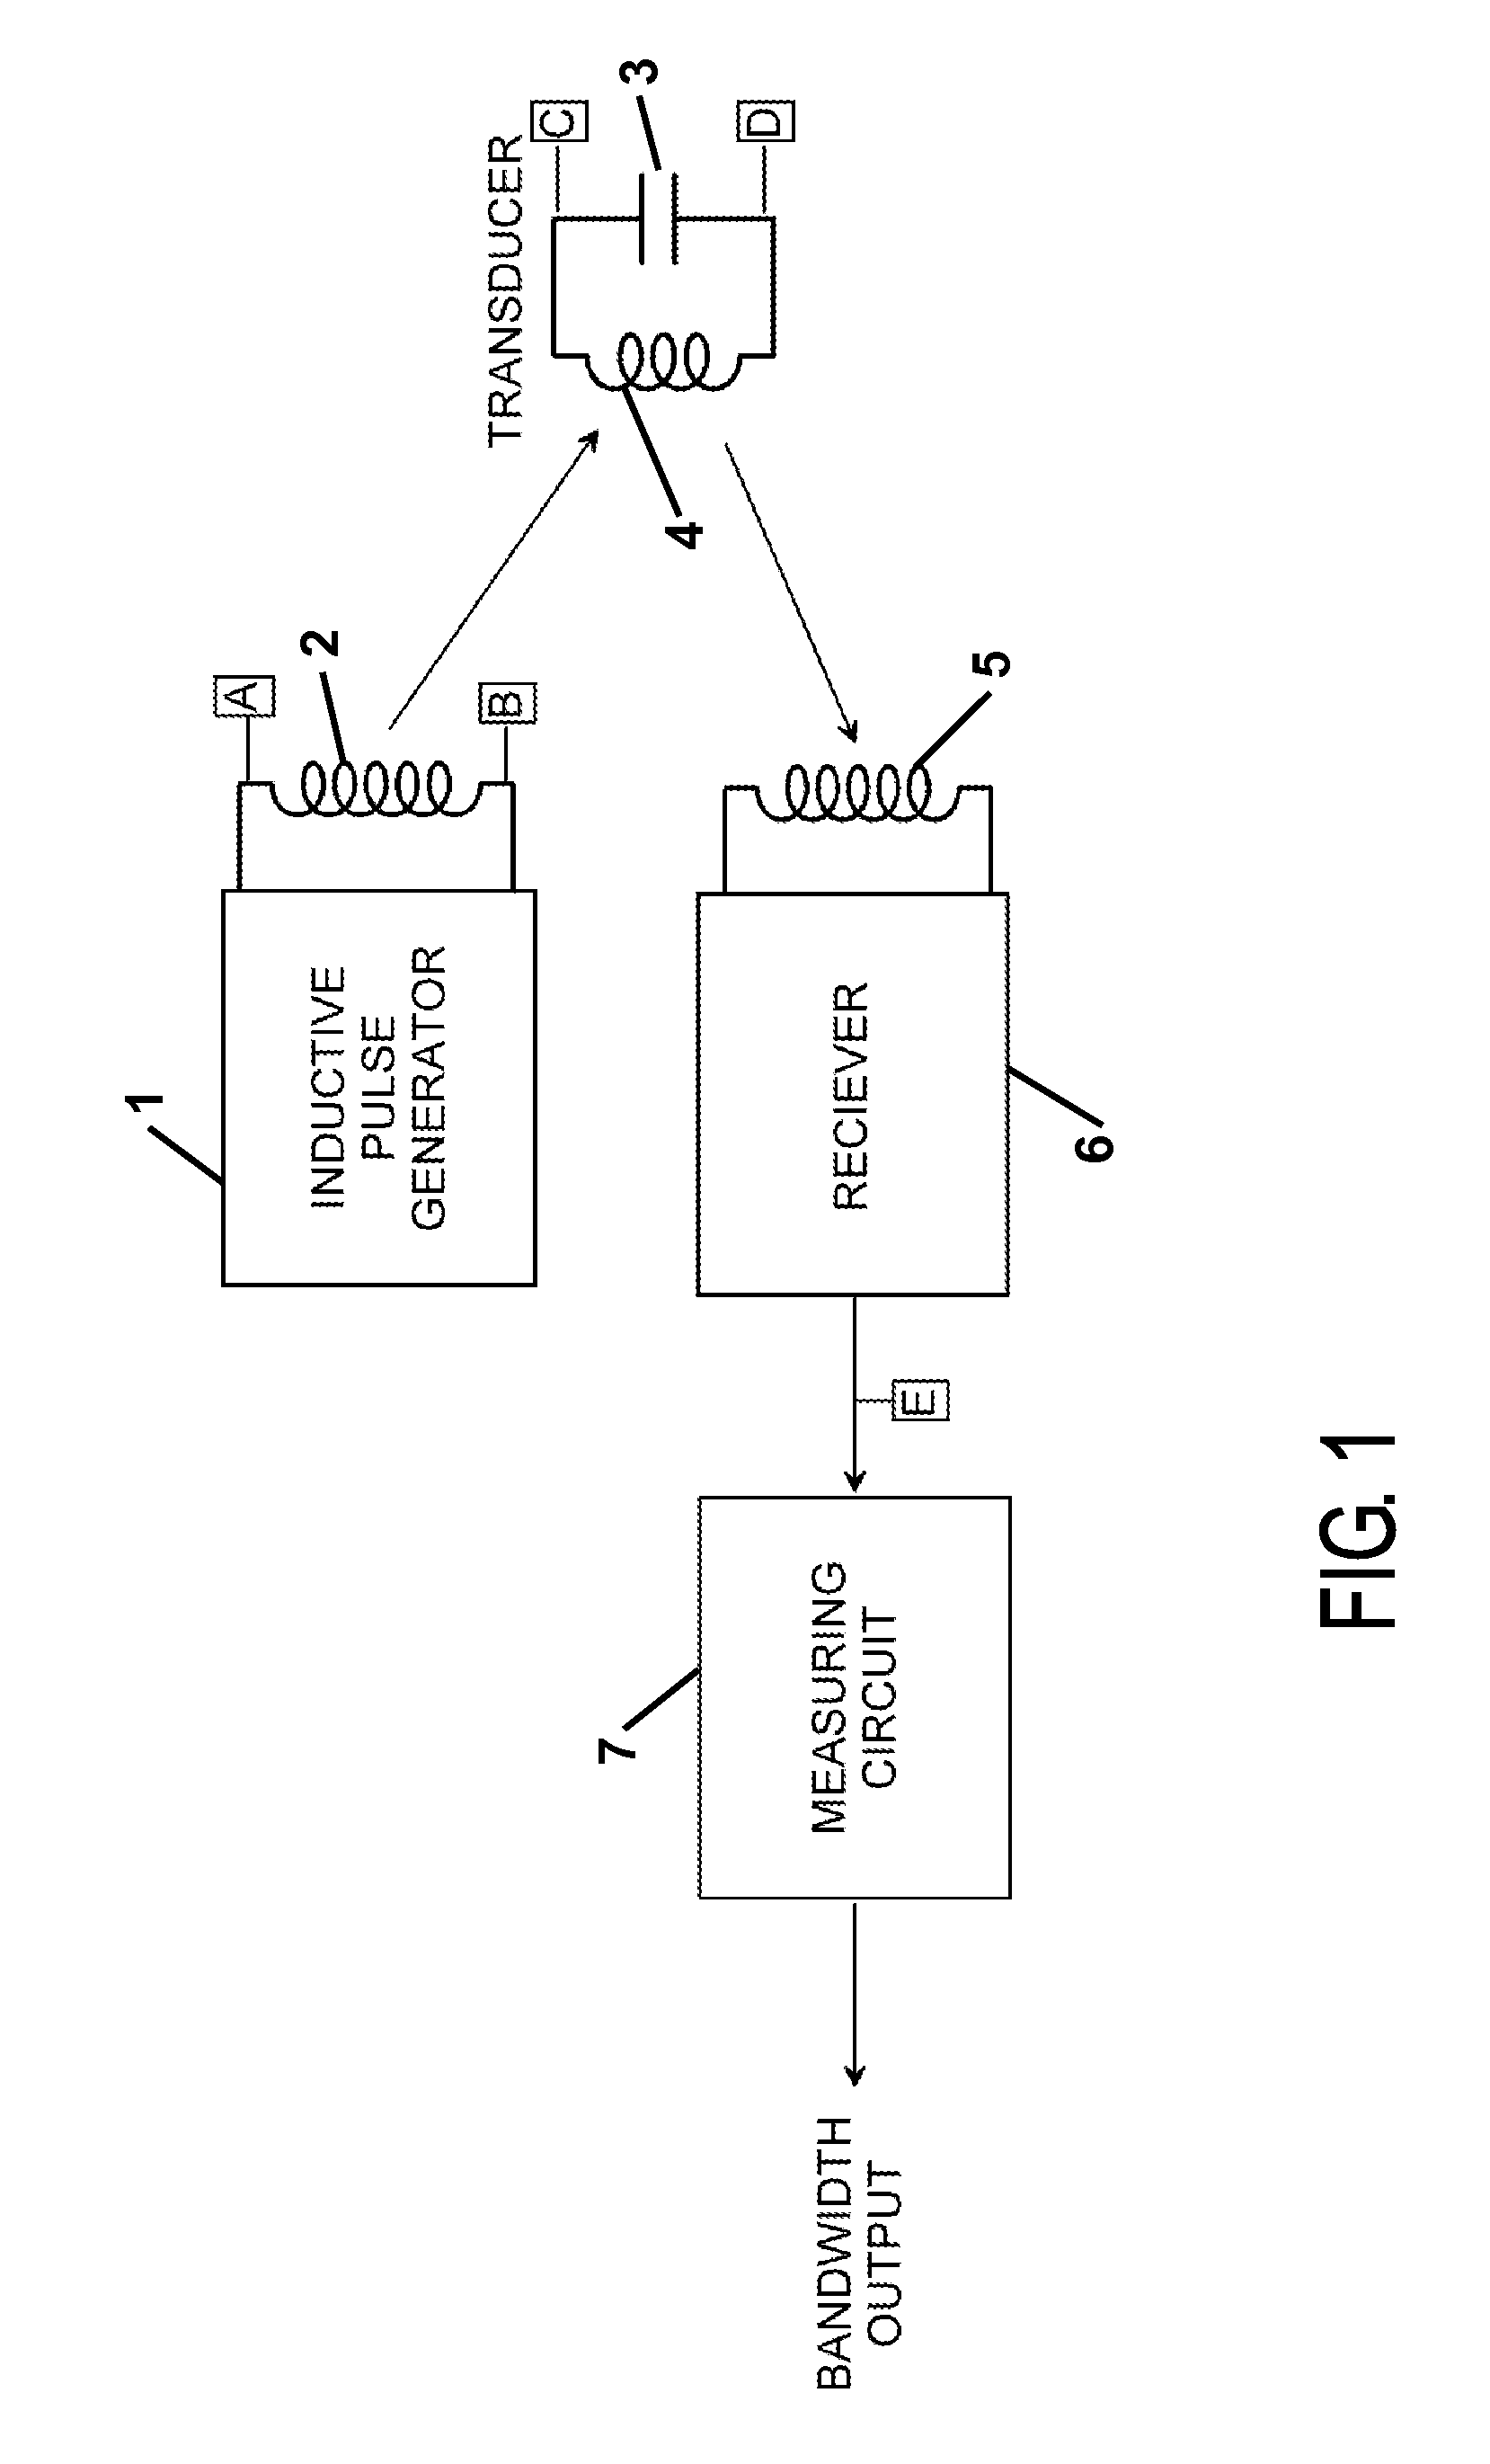 System for detecting and measuring parameters of passive transponders